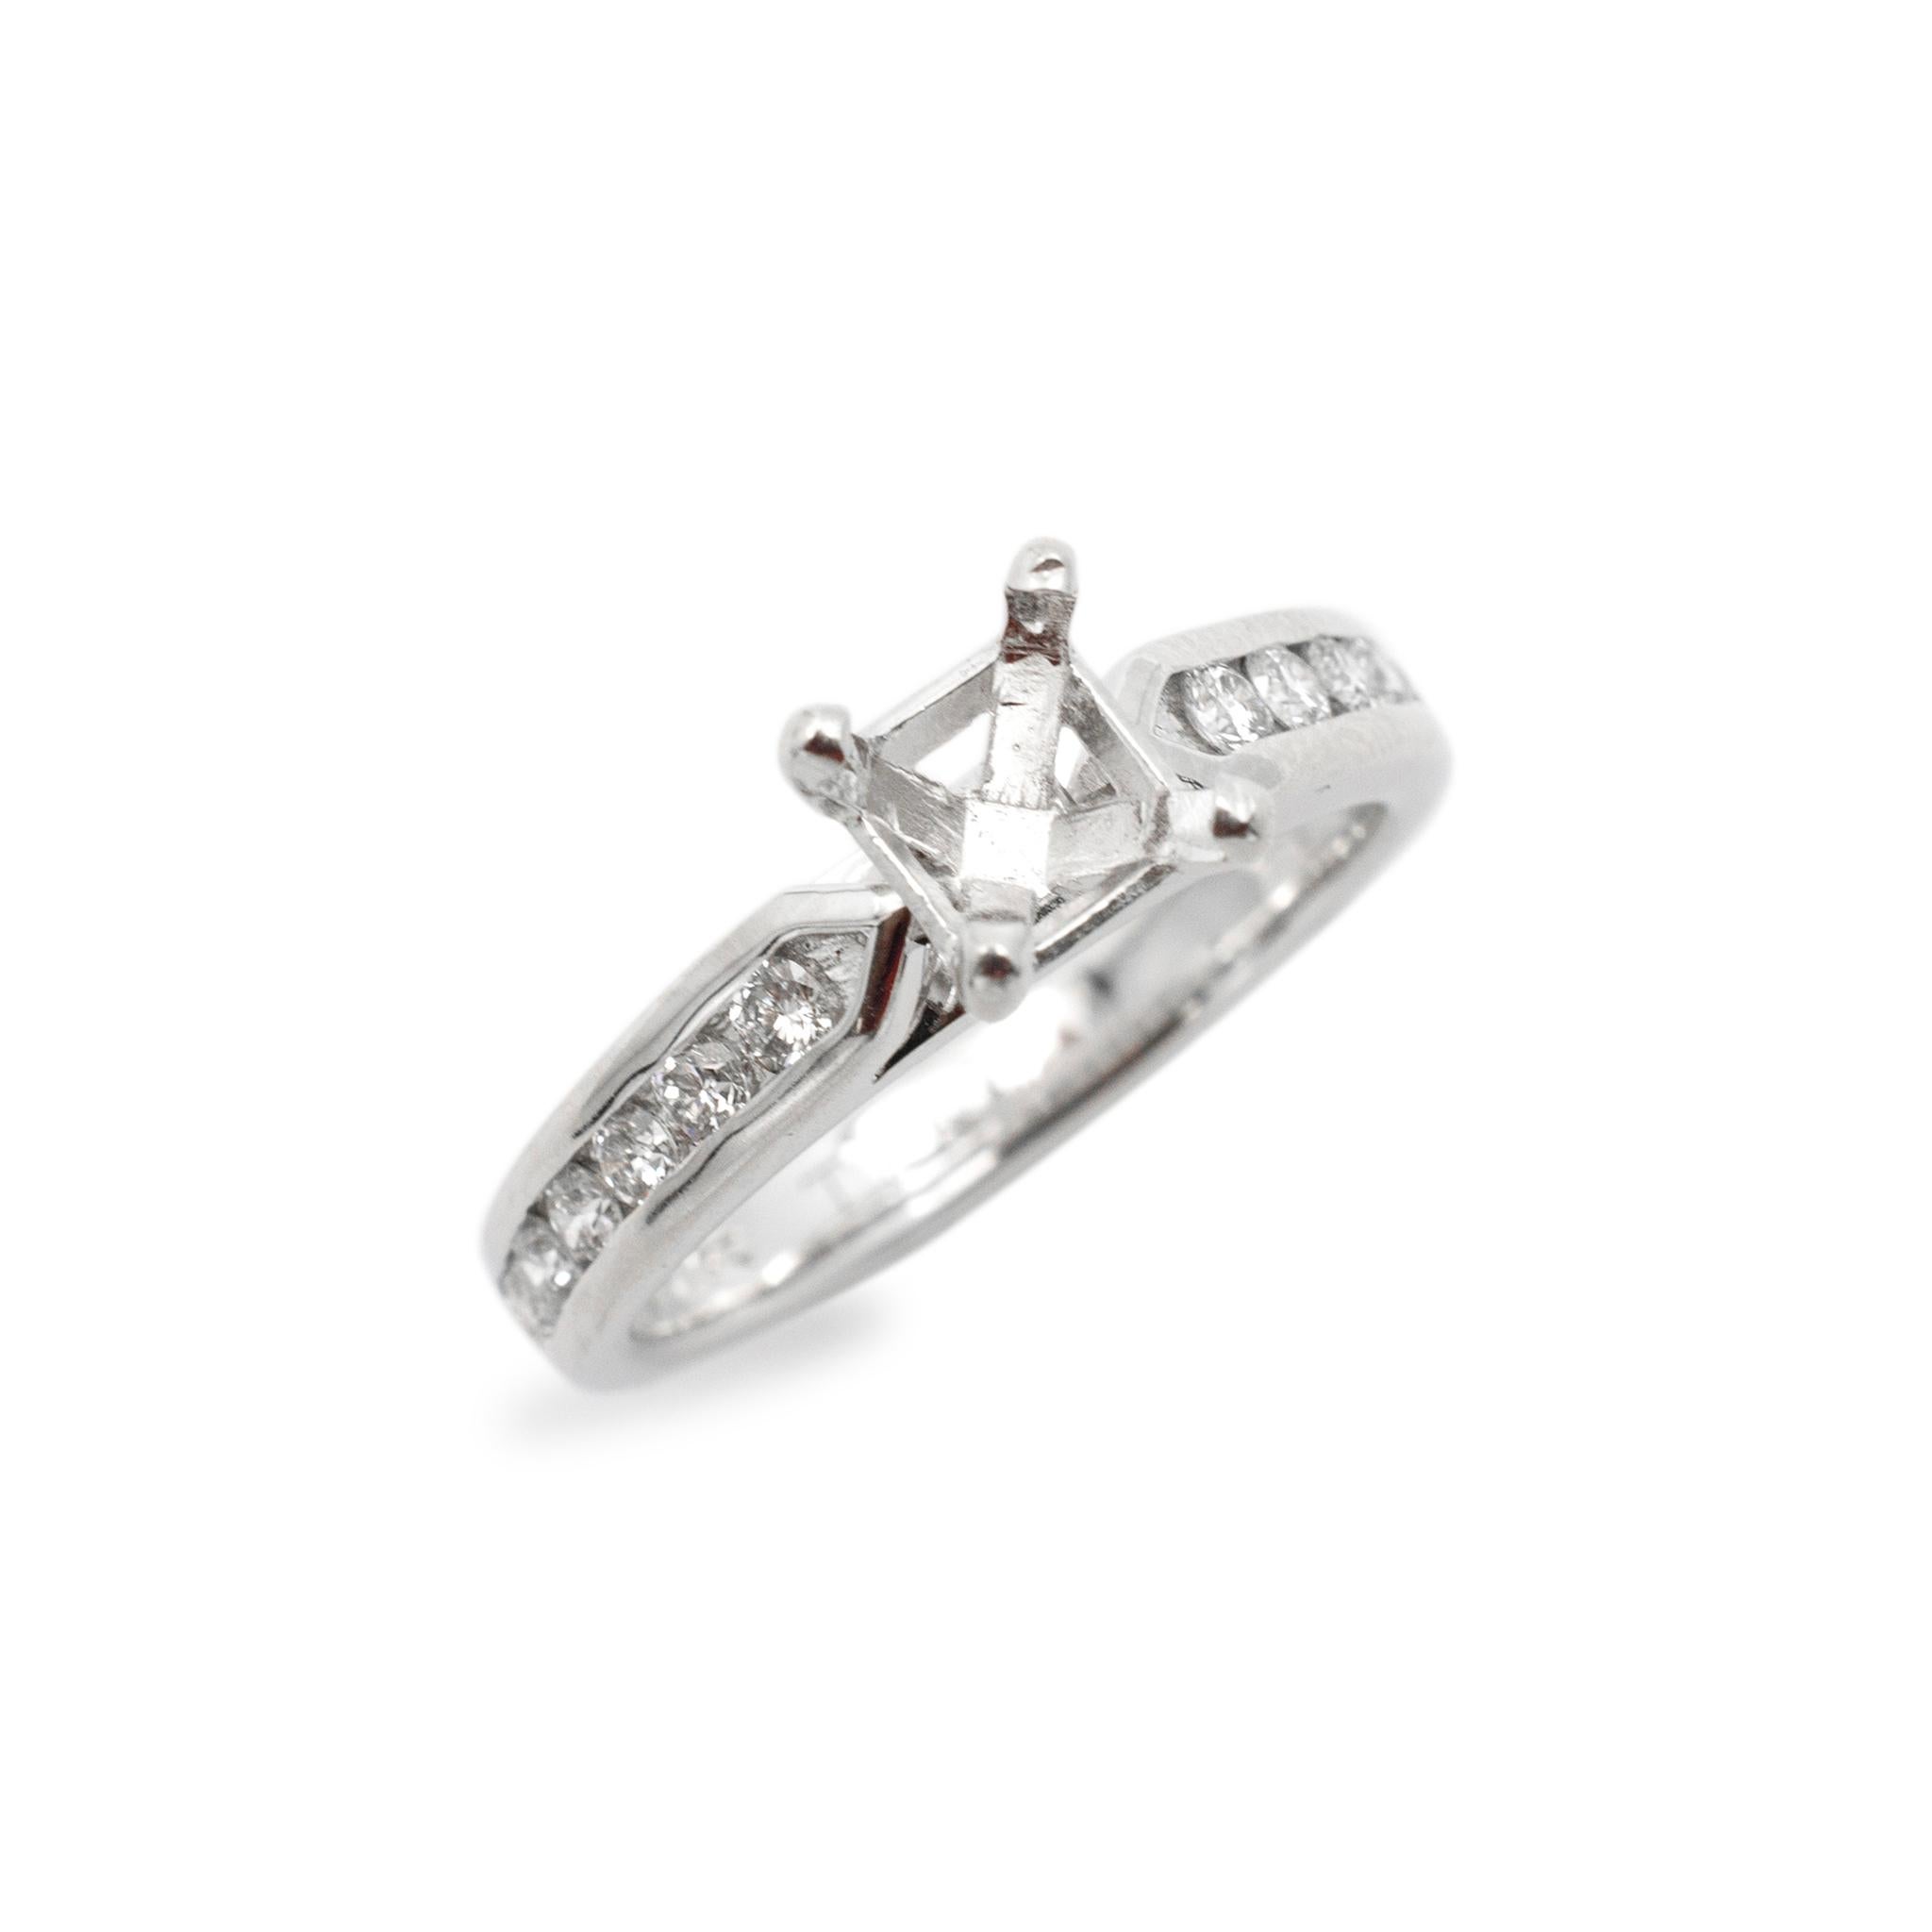 Gender: Ladies

Metal Type: 18K White Gold & Platinum

Size: 7.25

Shank Maximum Width: 3.70 mm

Weight: 6.32 grams

Ladies 18K white gold and platinum diamond accented engagement semi-mount ring with a half round shank. Engraved with 